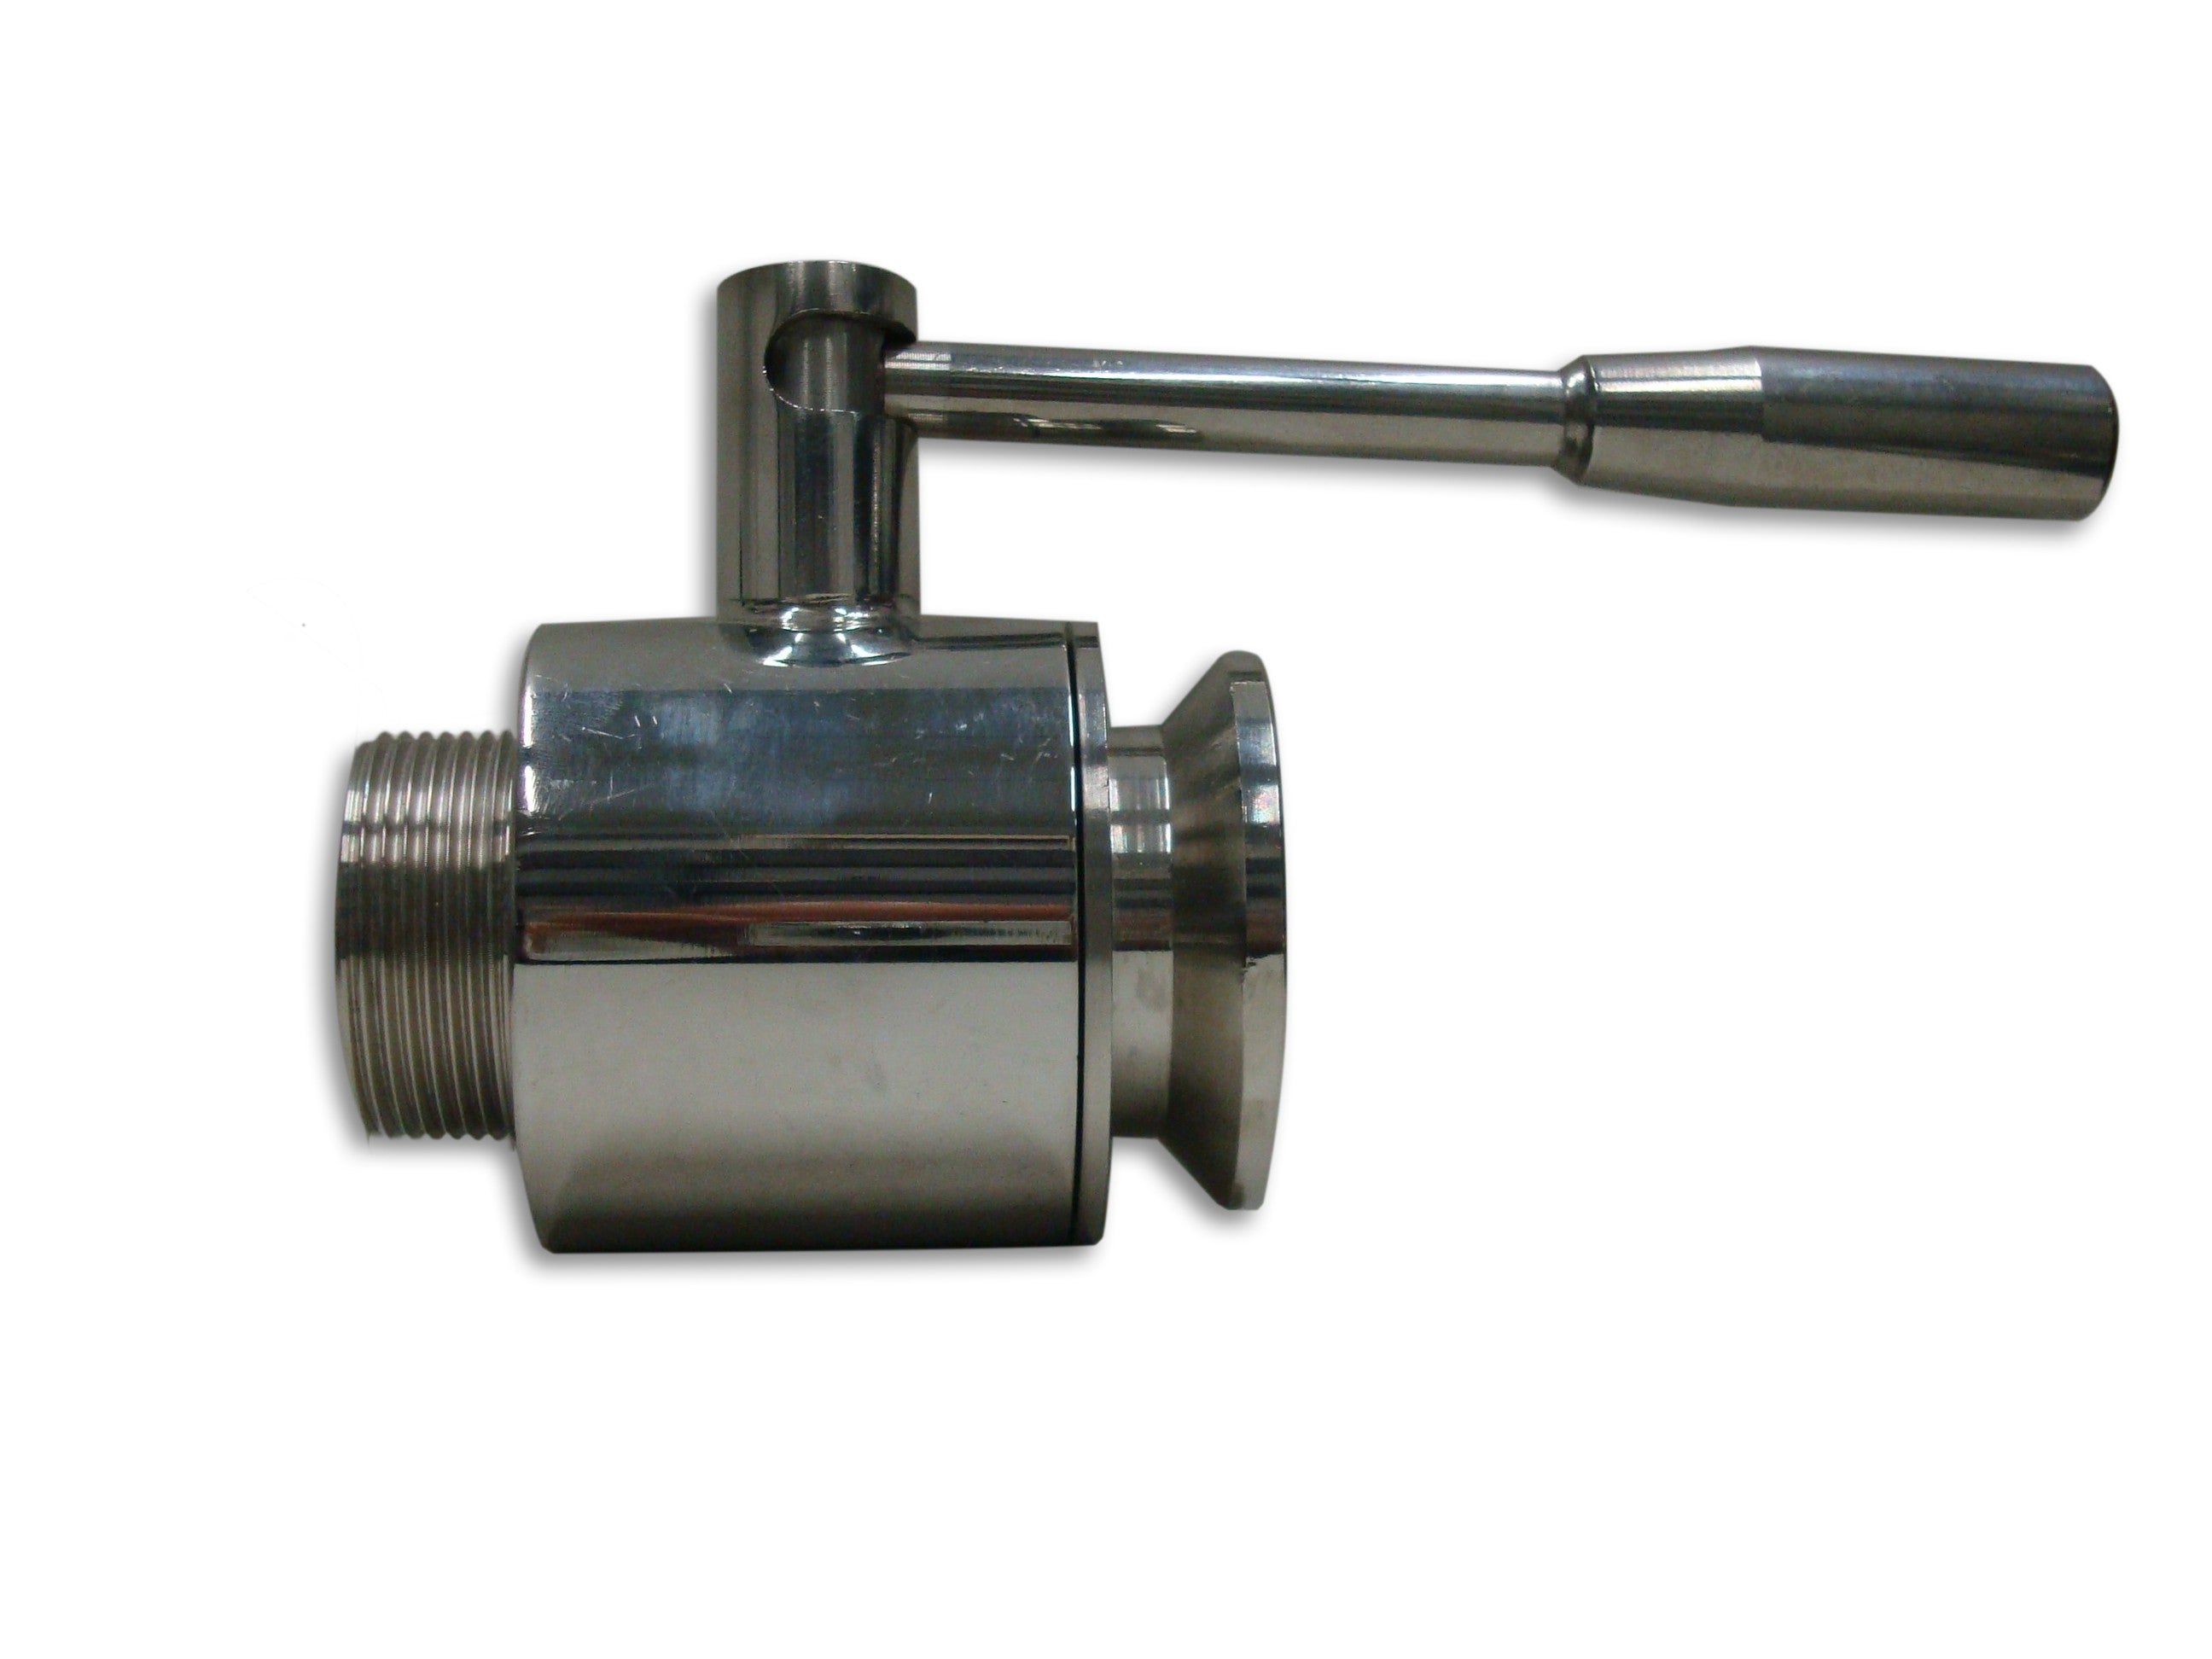 Stainless steel ball valve 3/4" with connection 40 garolla